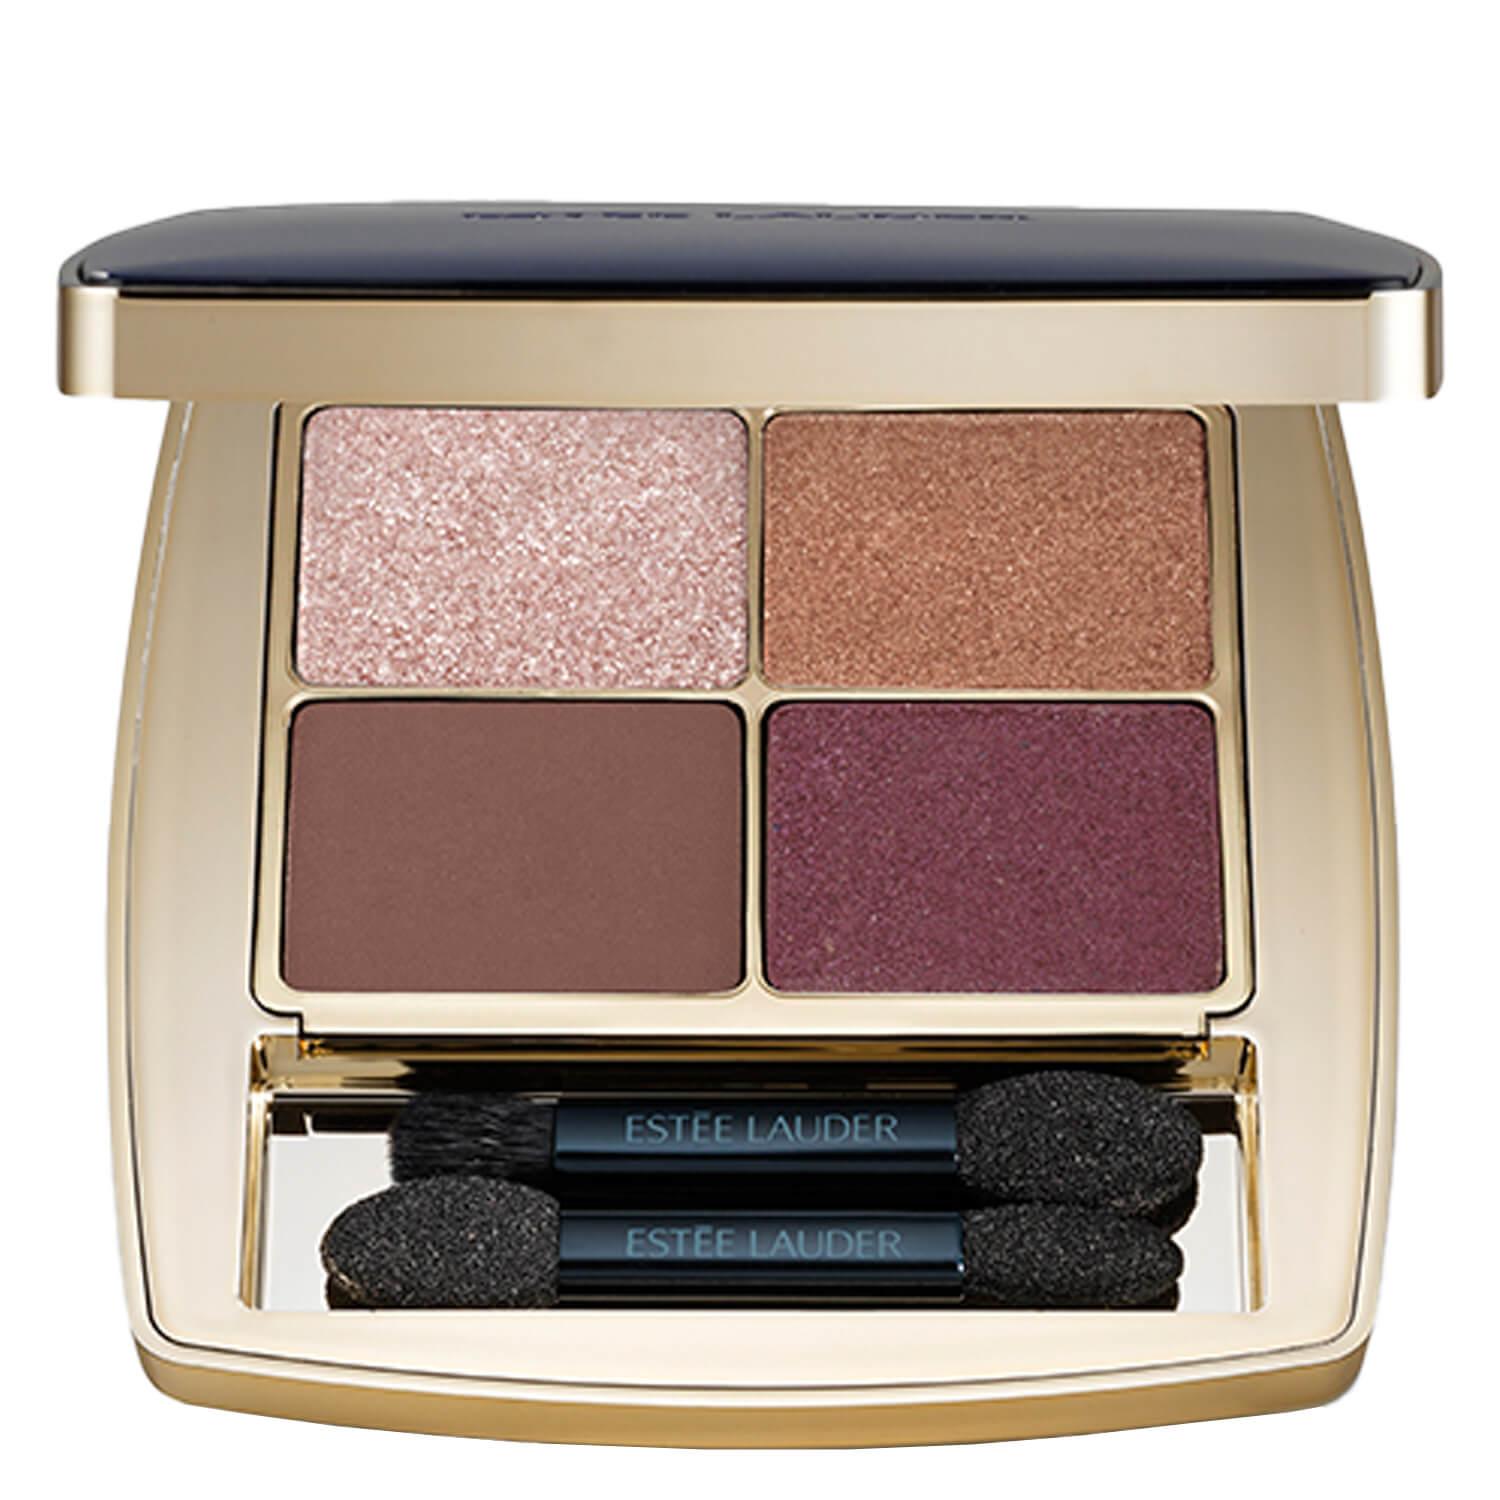 Pure Color Envy - Luxe EyeShadow Quad Rebel Patels 01